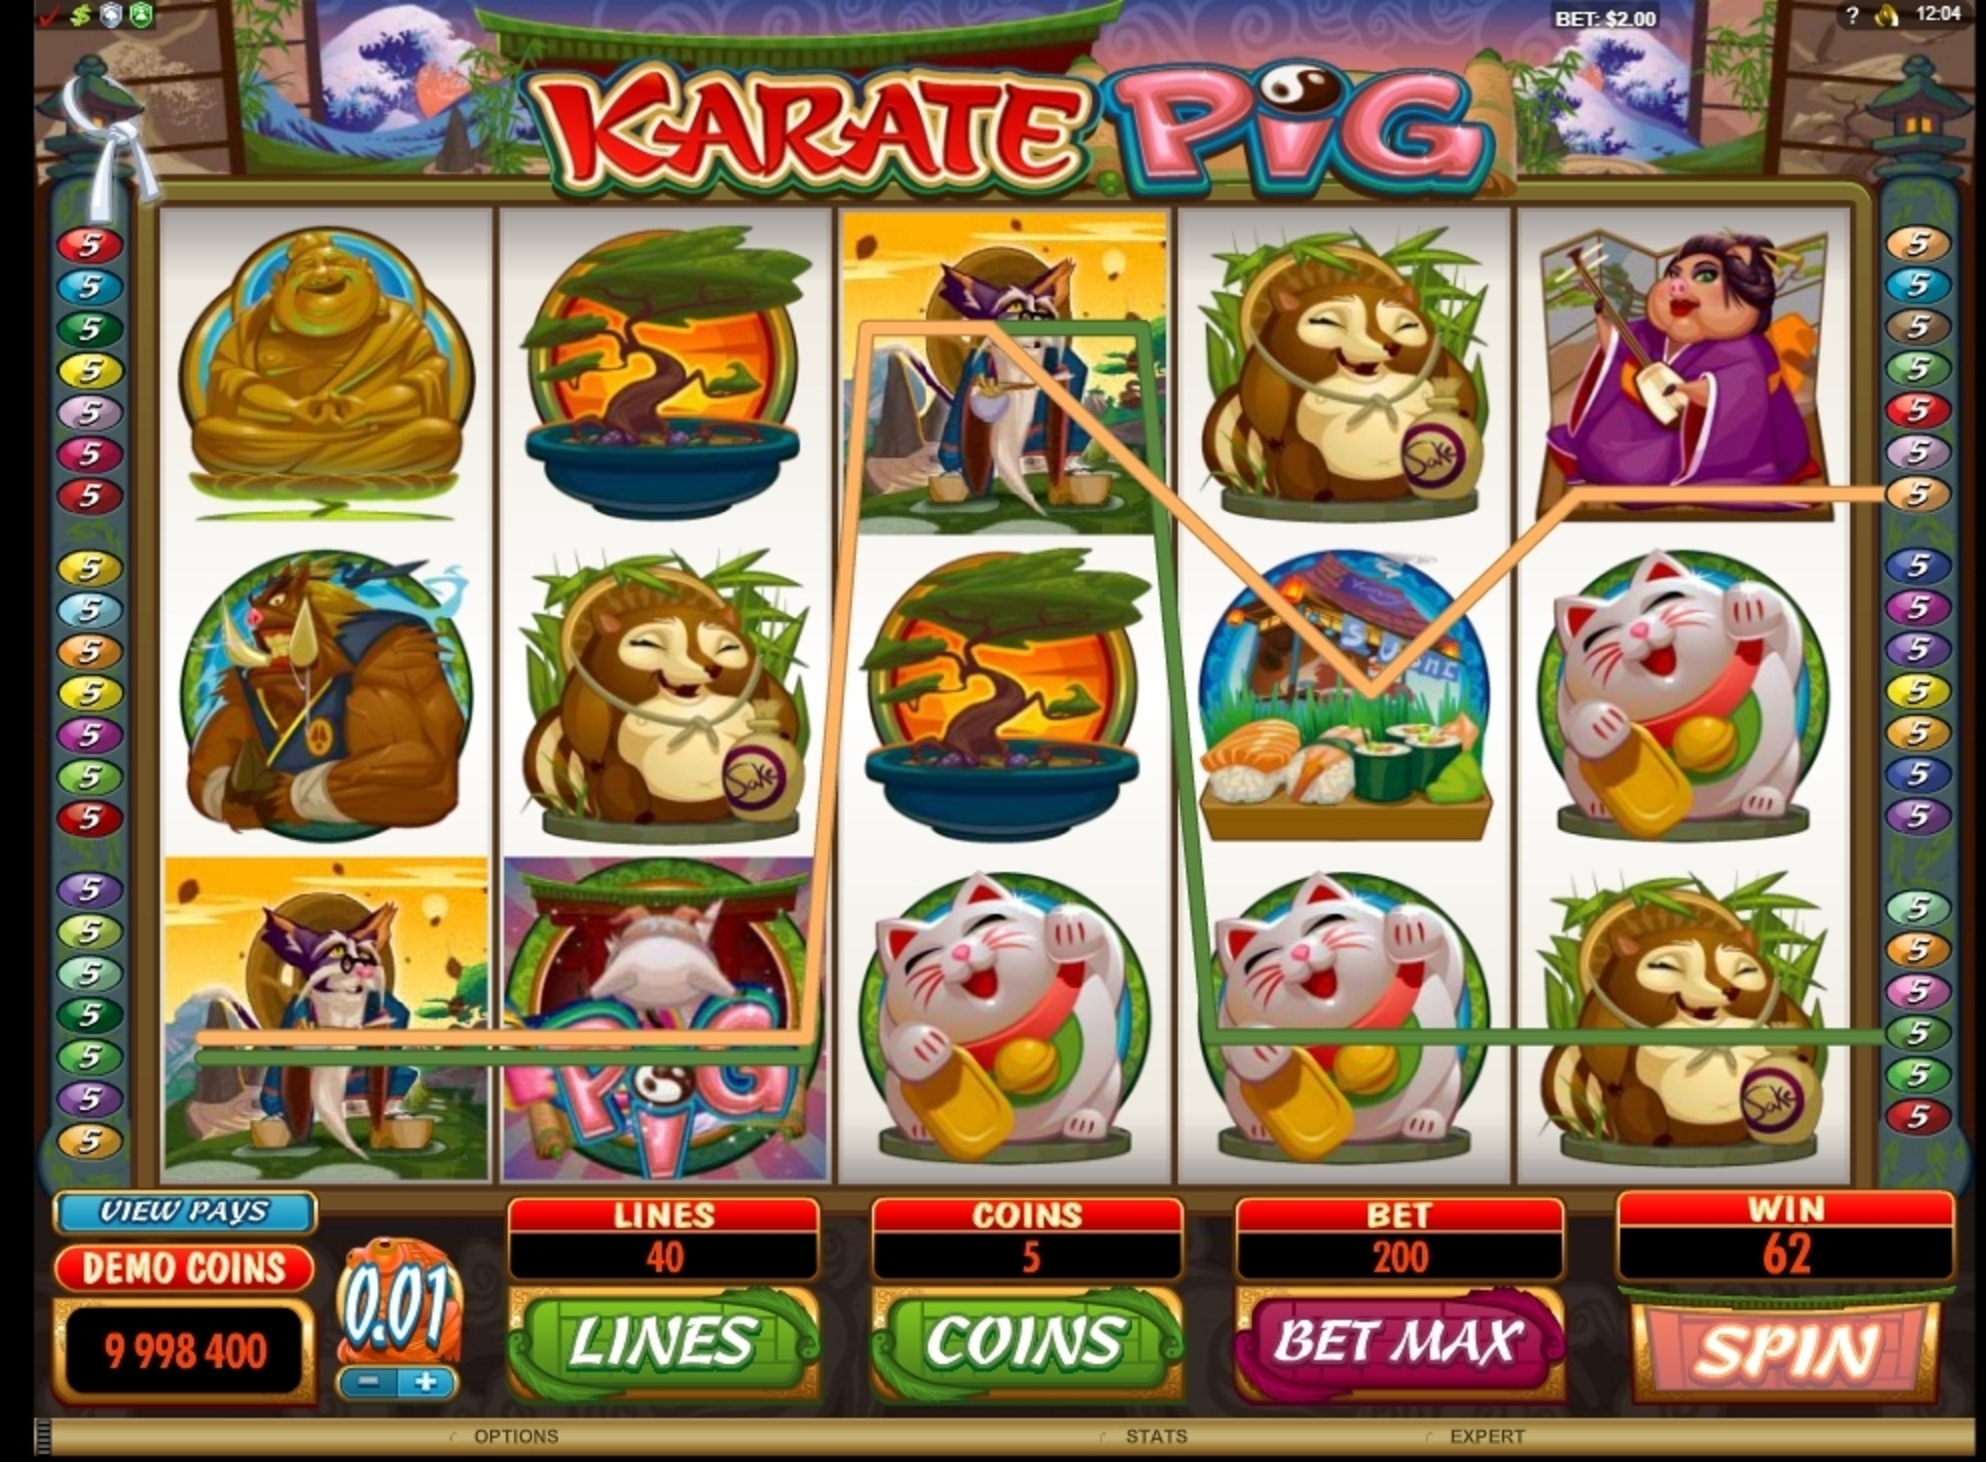 Win Money in Karate Pig Free Slot Game by Microgaming